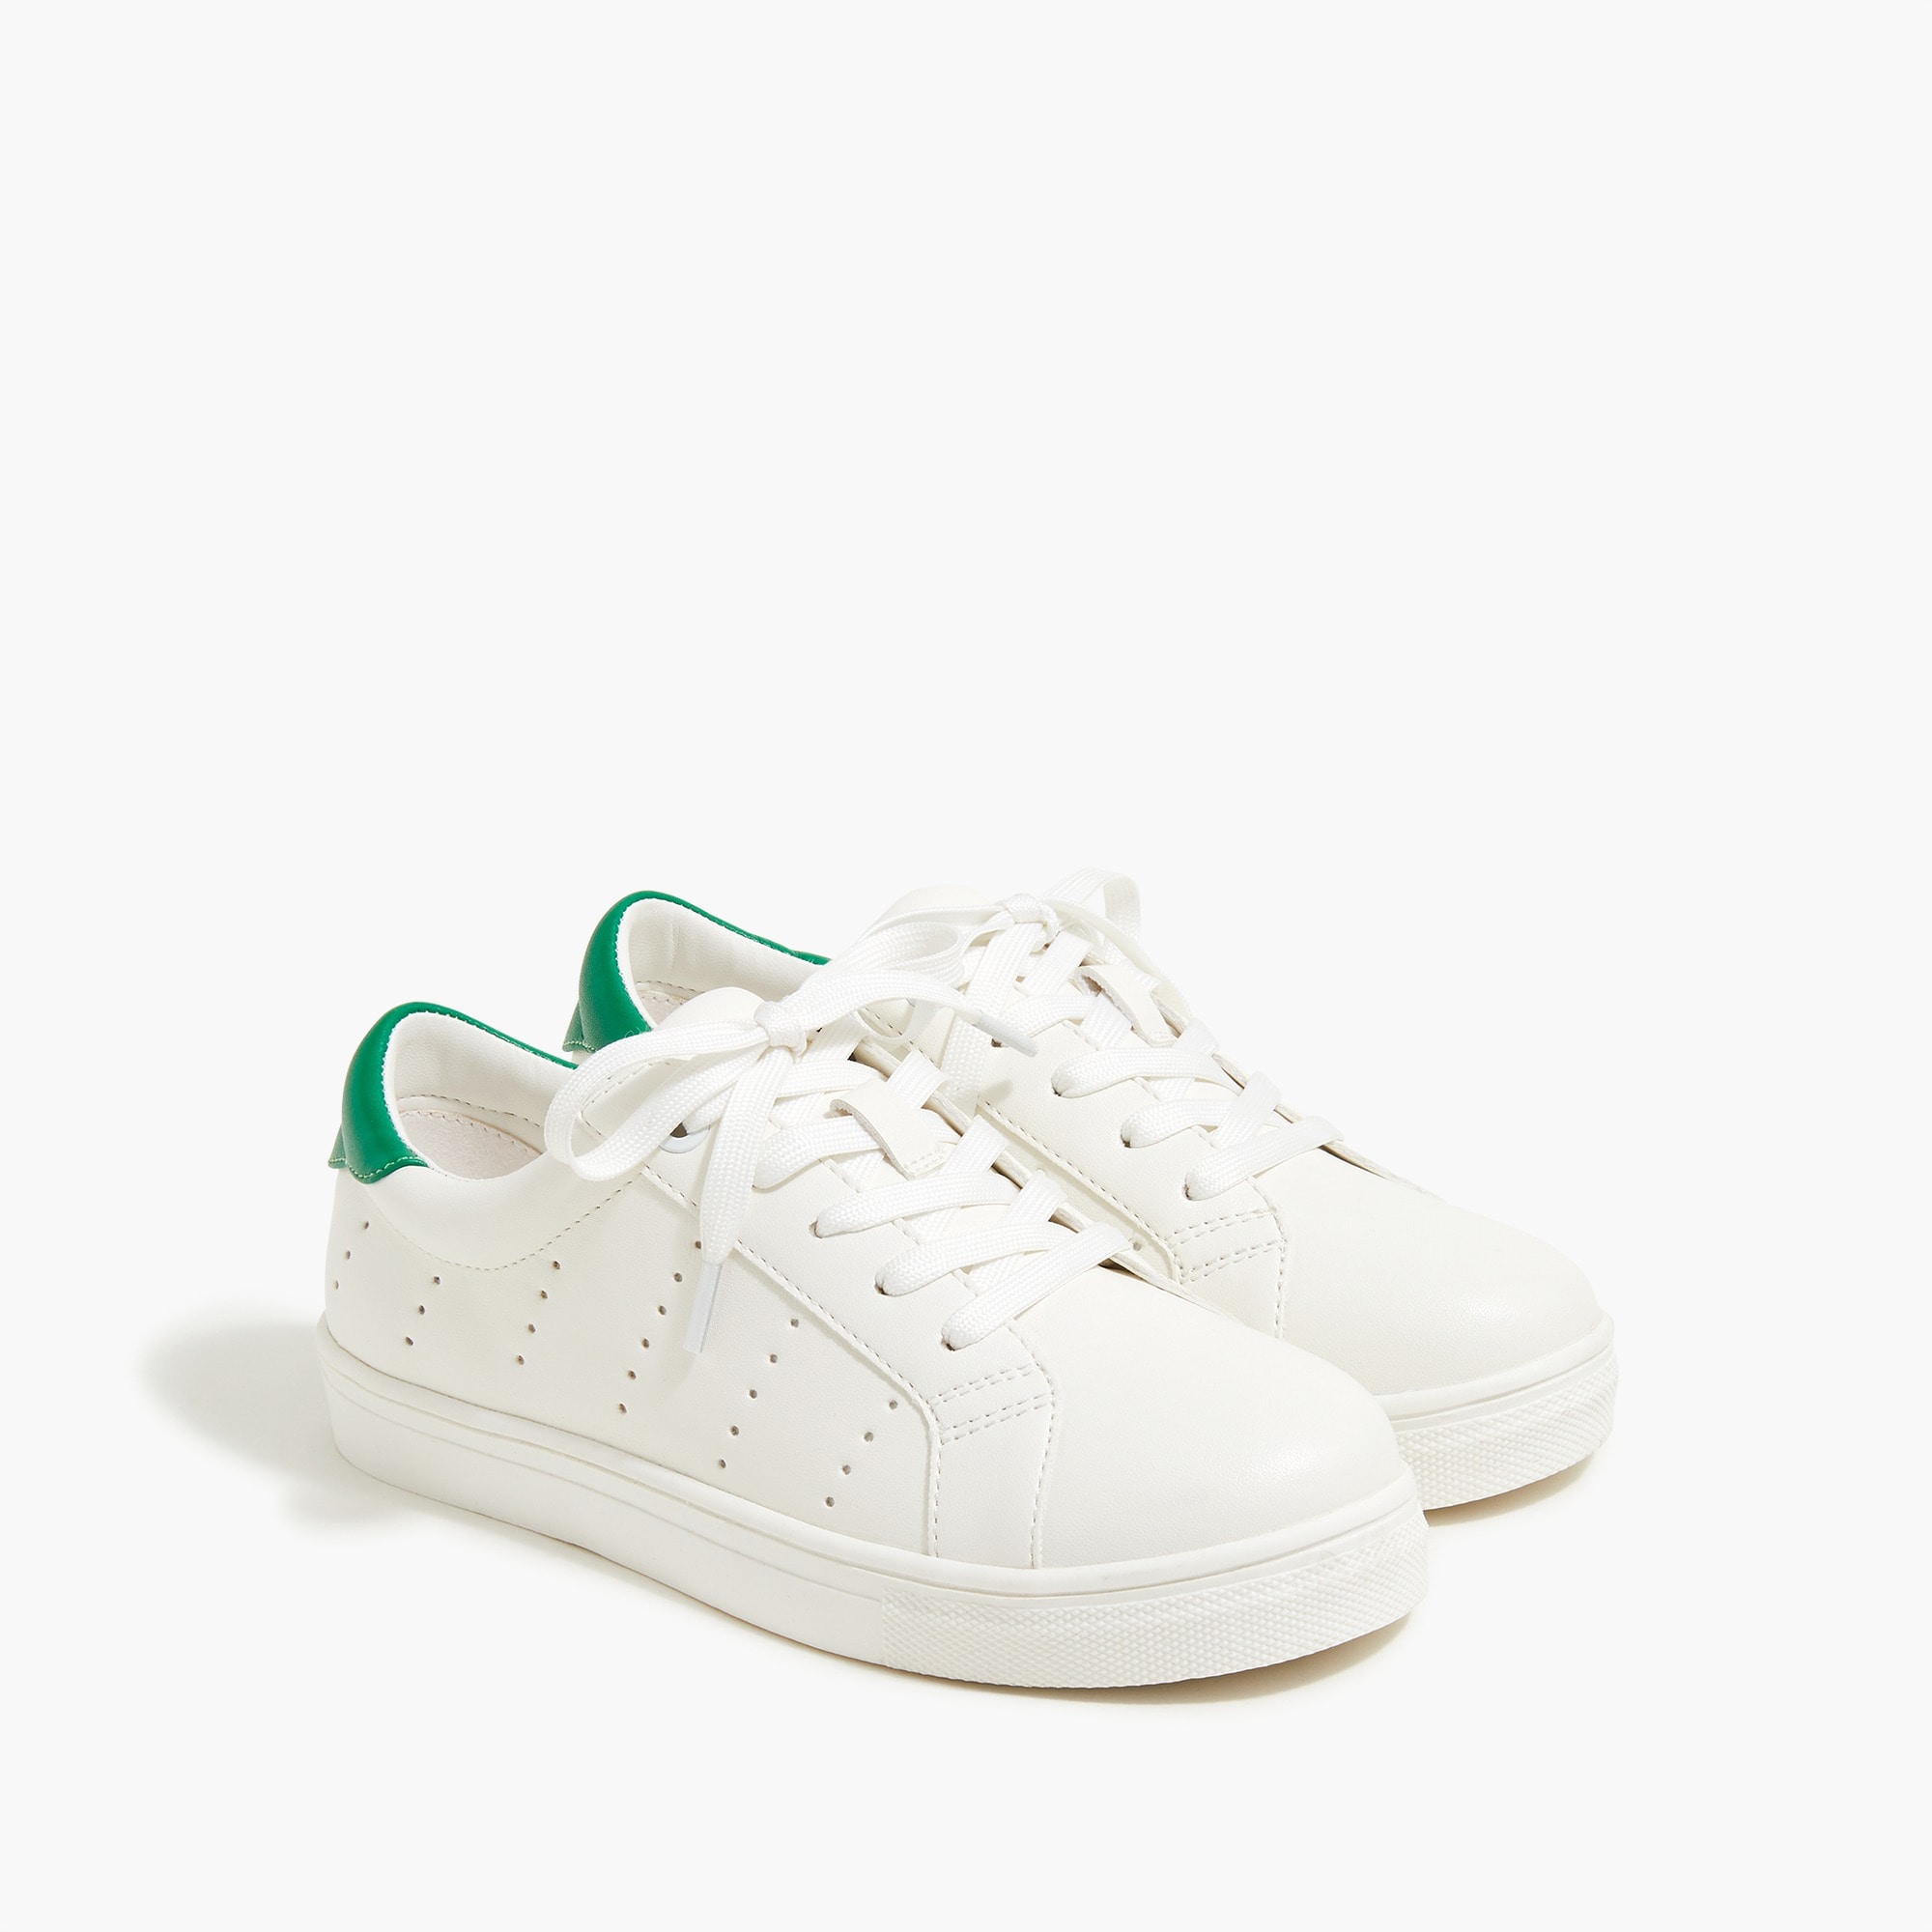 Kids' lace-up sneakers